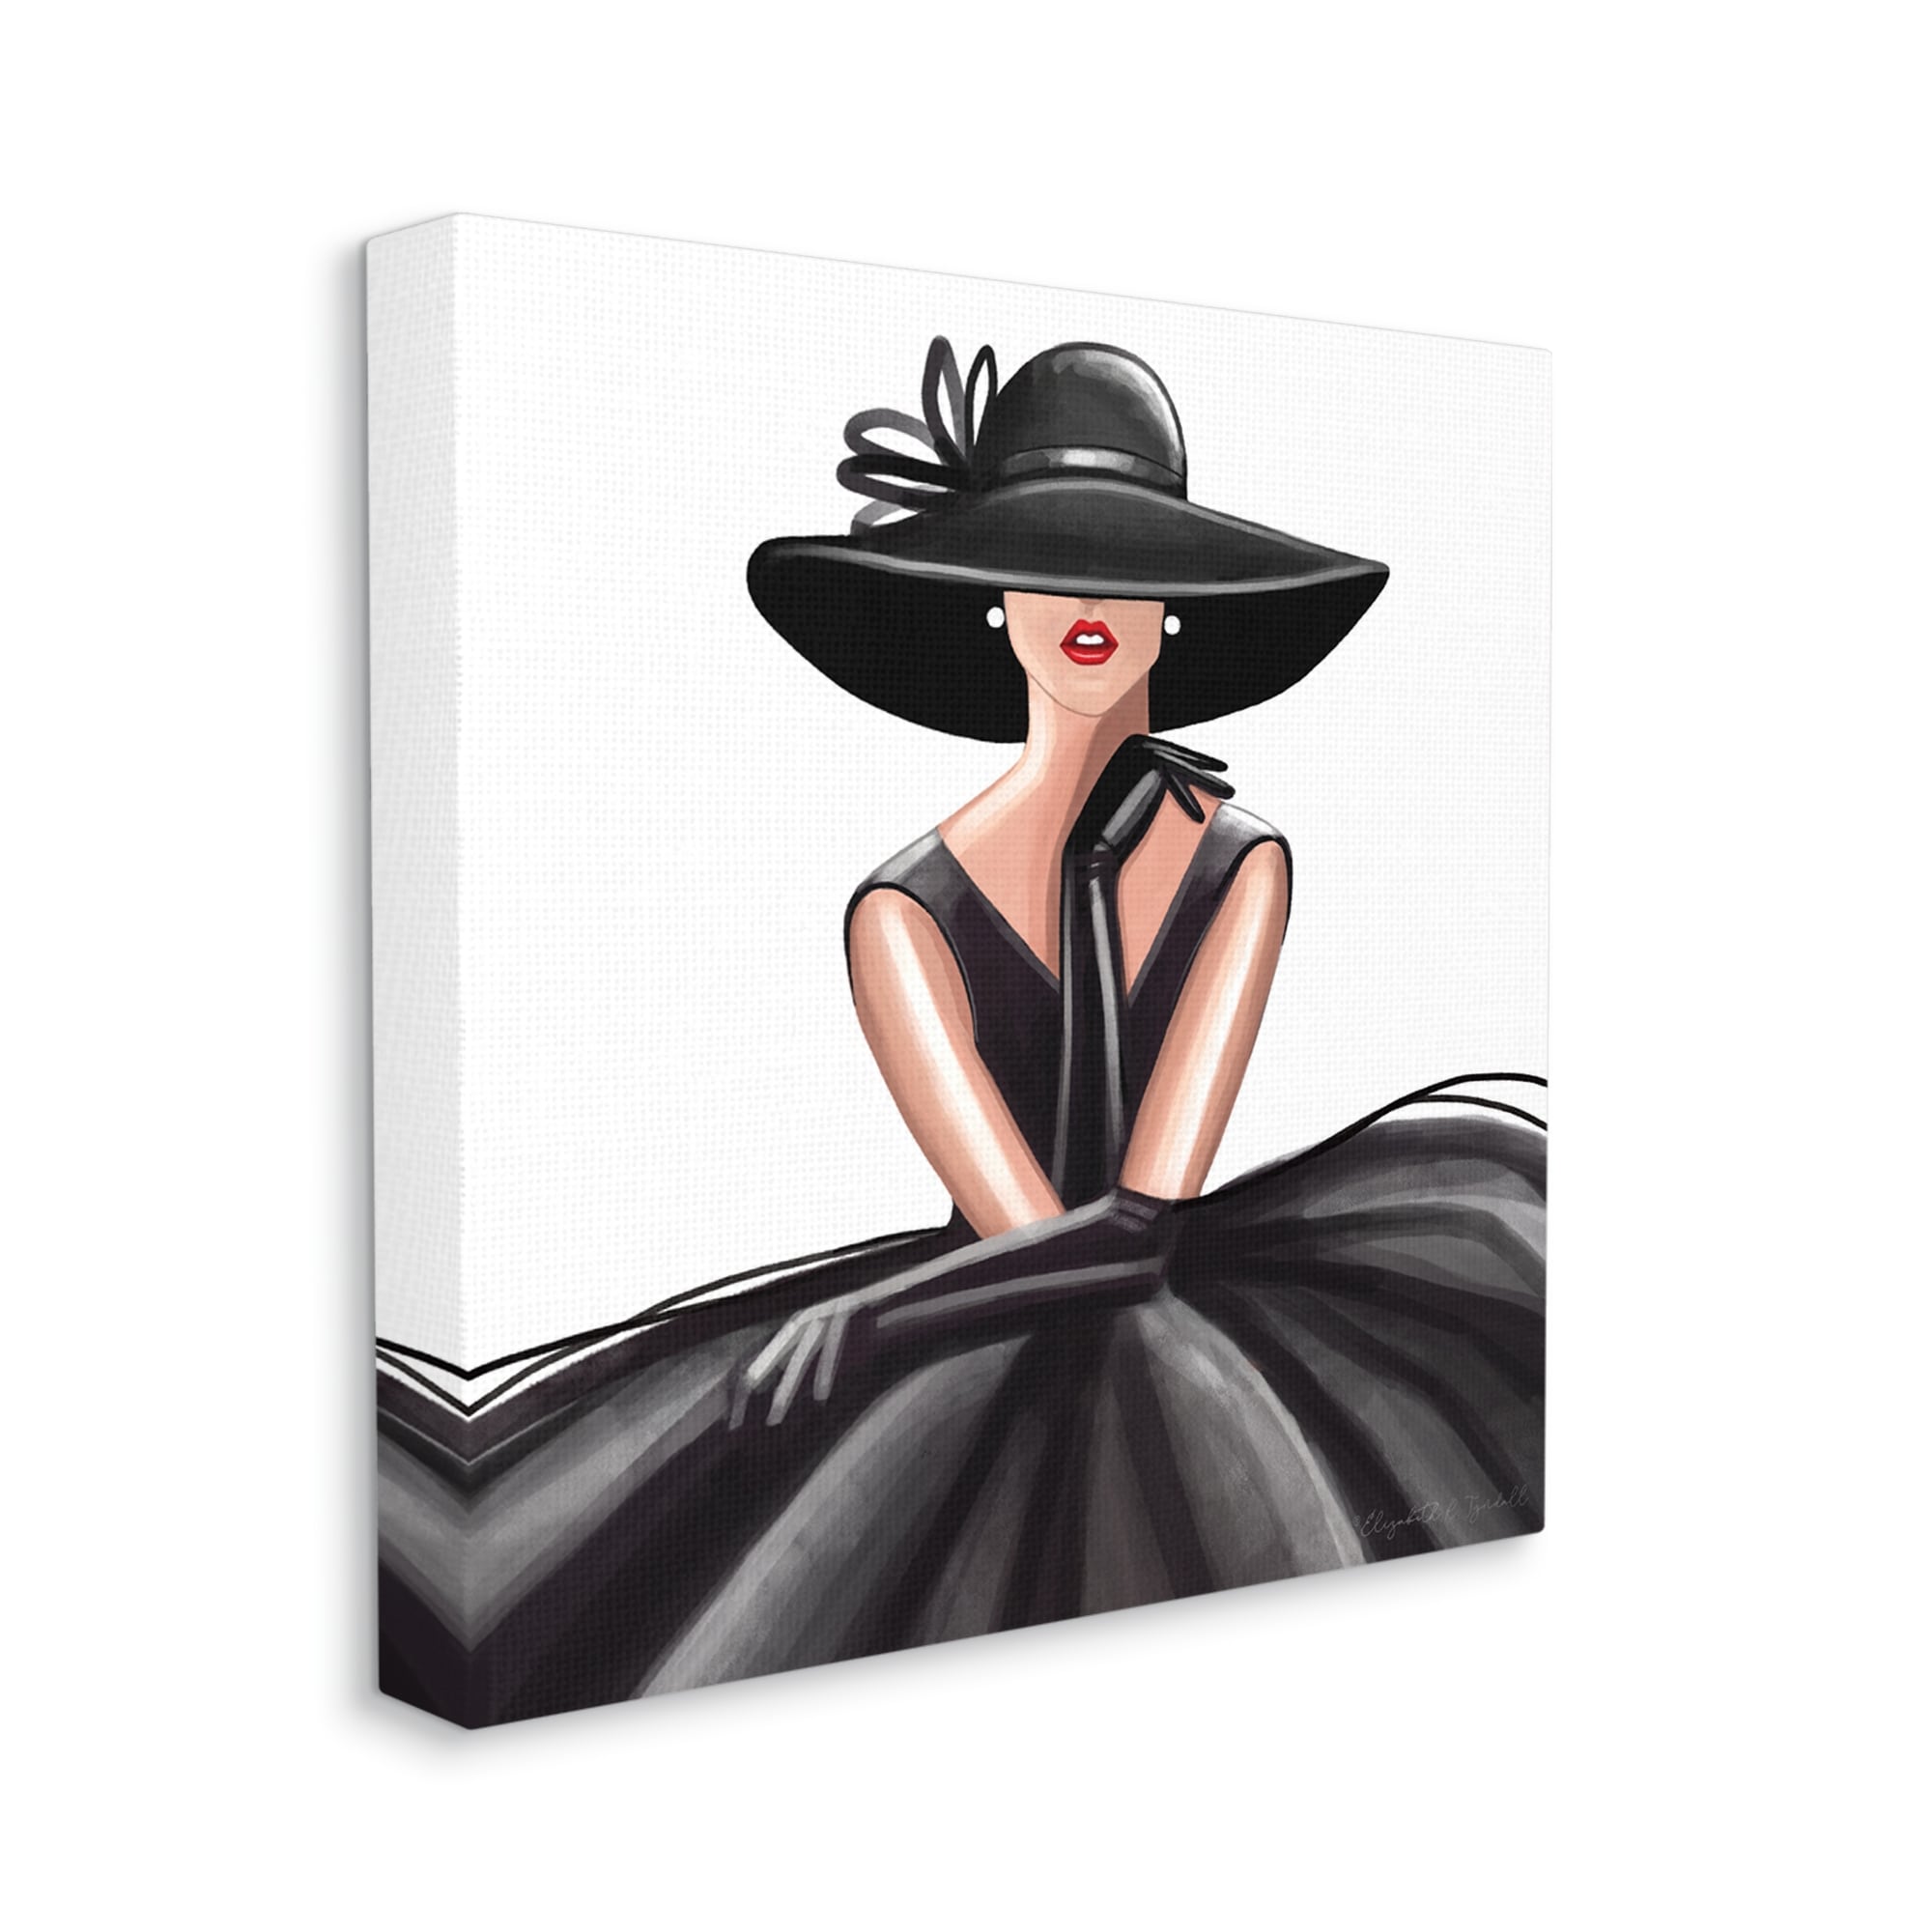 Stupell Industries Elegant Woman's Hand Pose with Fashion Tattoo Black Framed Giclee, 11 x 14